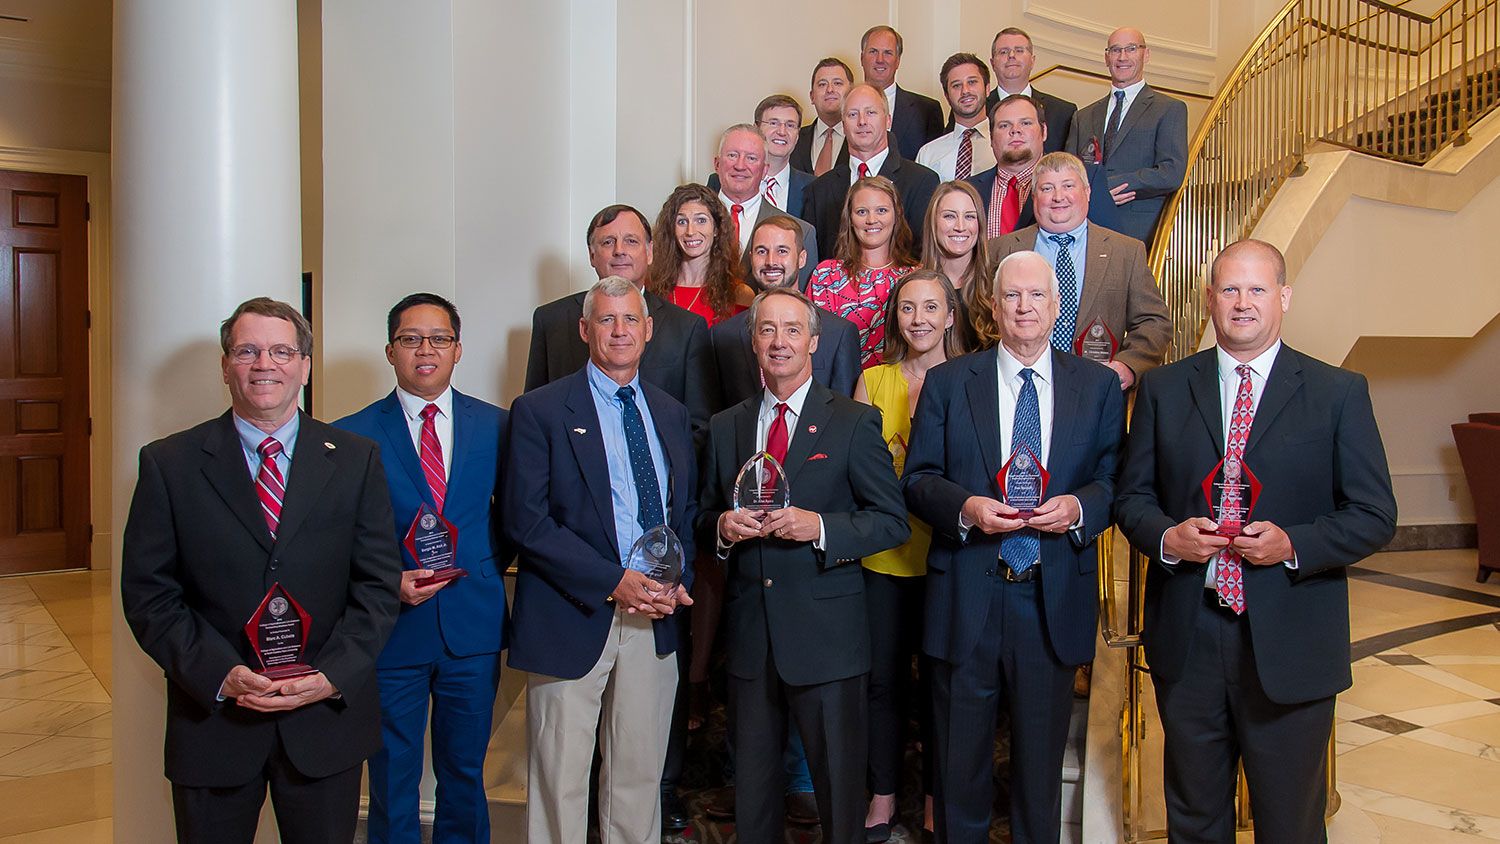 Winners of the 2018 CALS Distinguished and Outstanding Alumni Awards